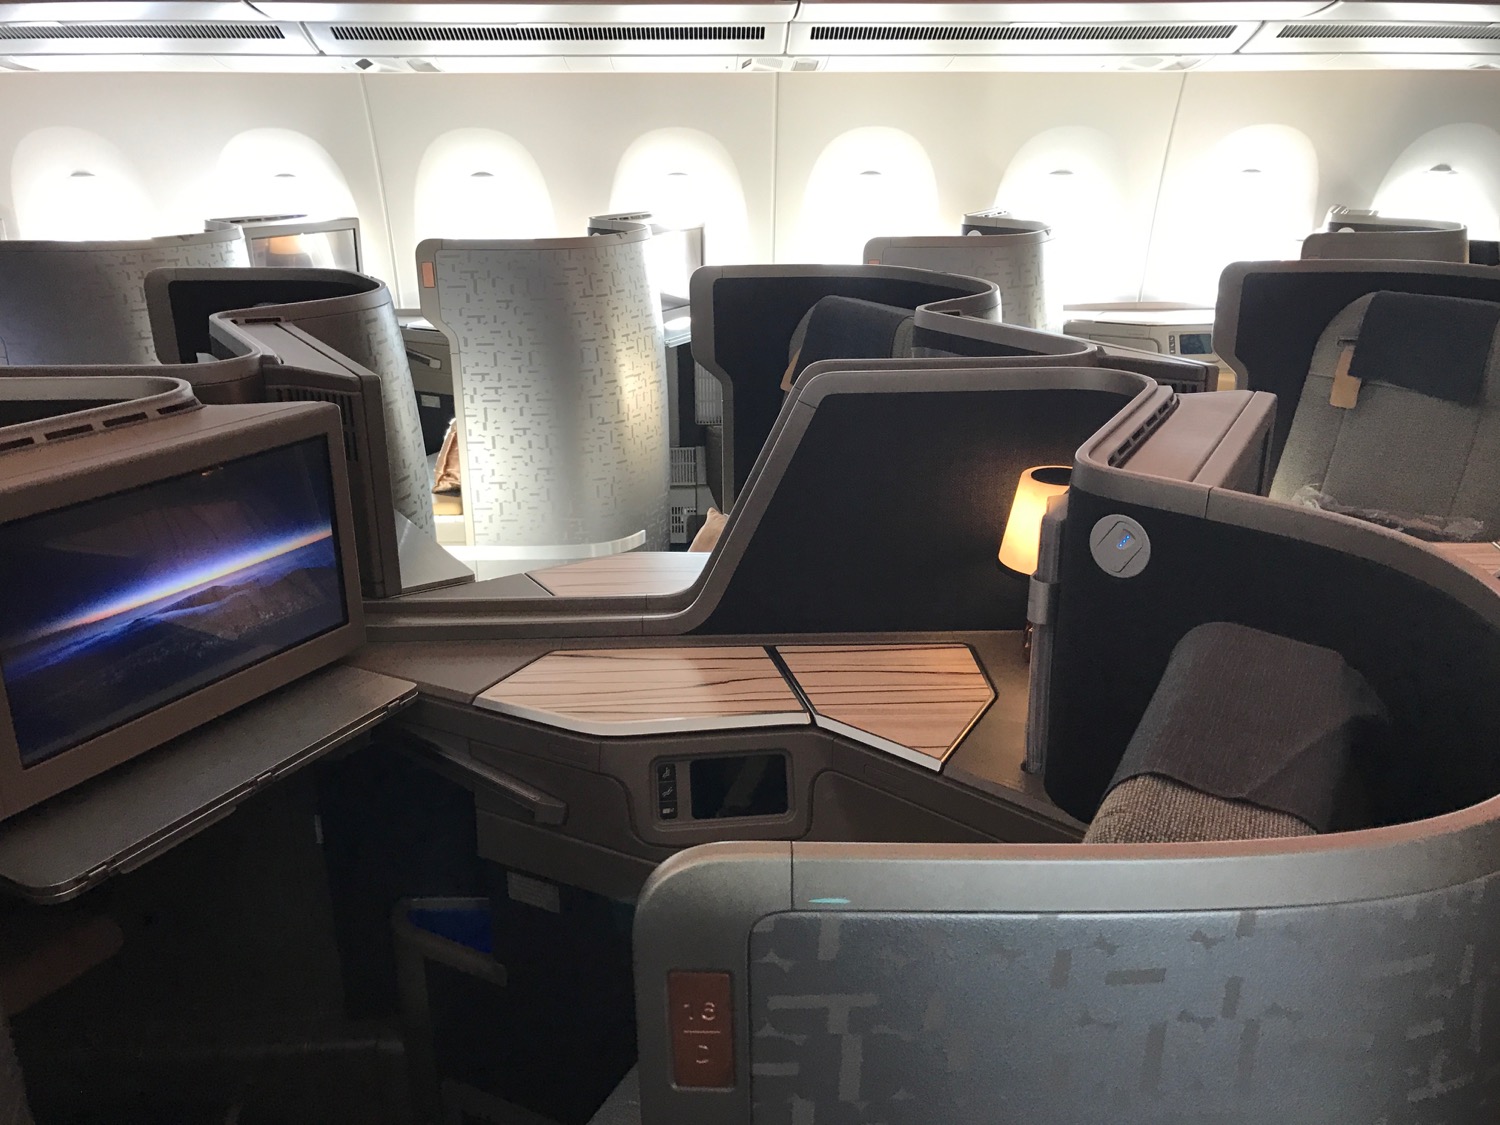 China Airlines A350 Business Class Review - 6